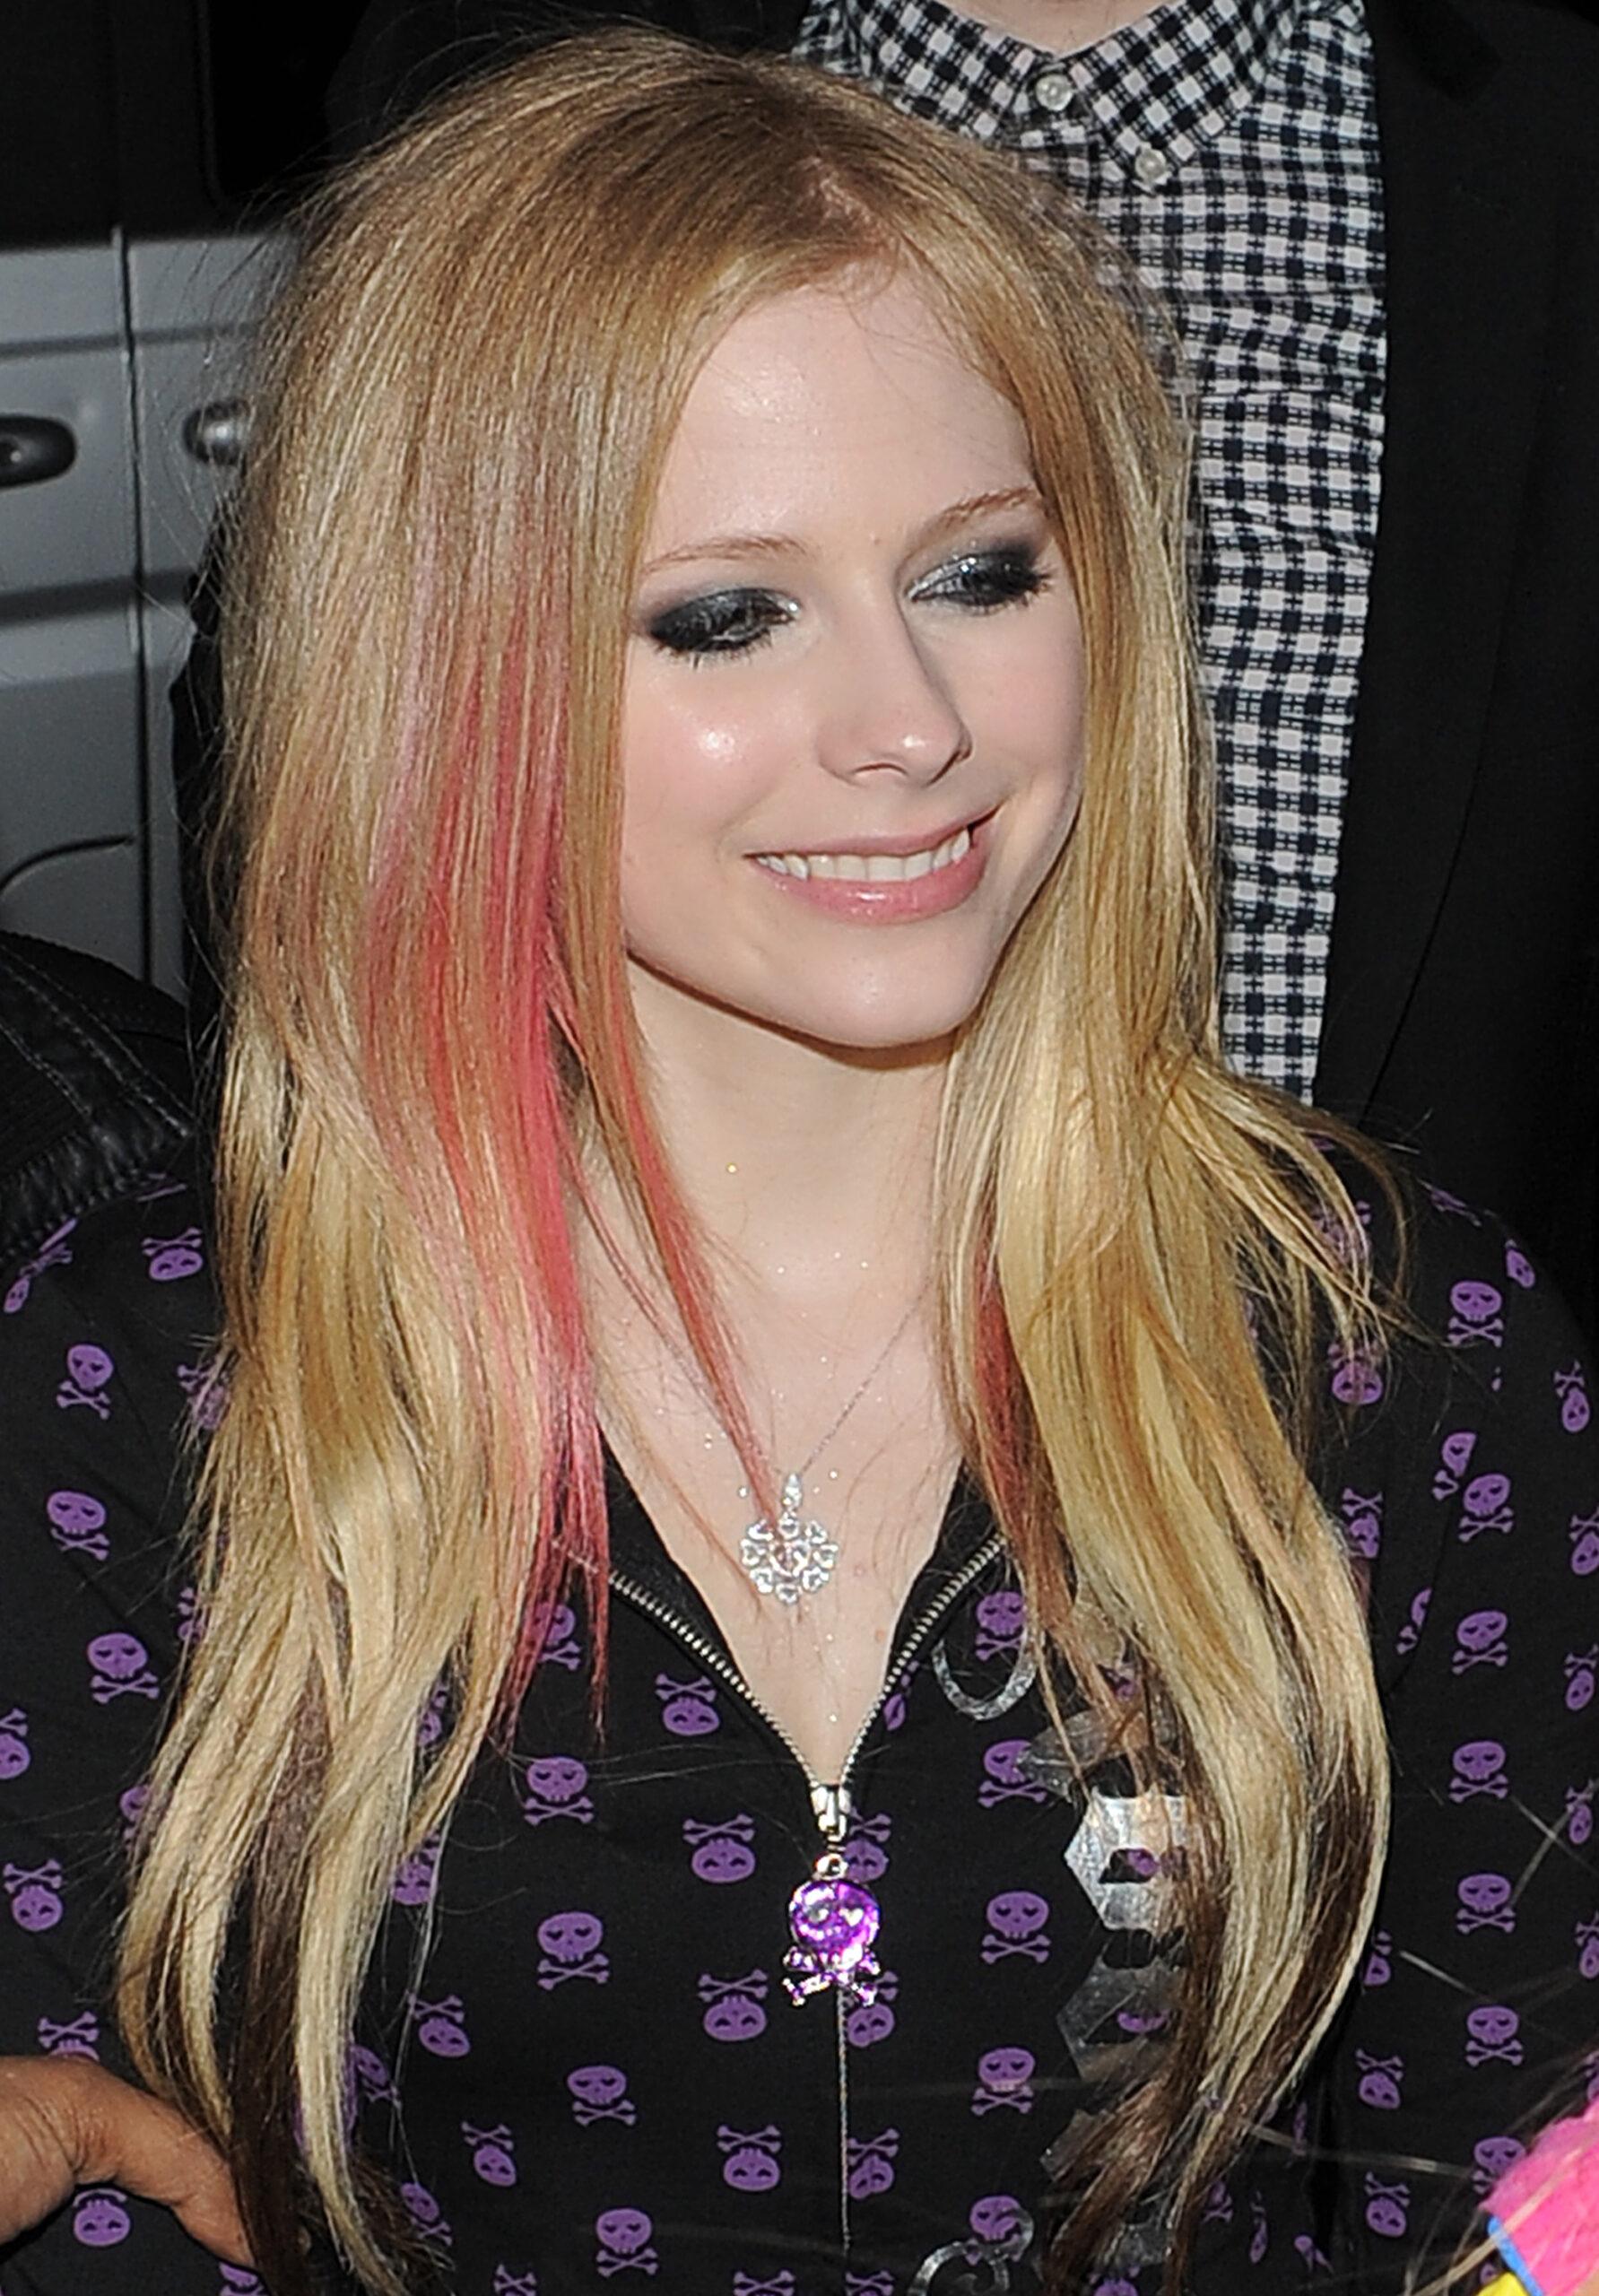 Avril Lavigne Spends a night on the town in London taking in a few of the cities most exclusive nightclubs